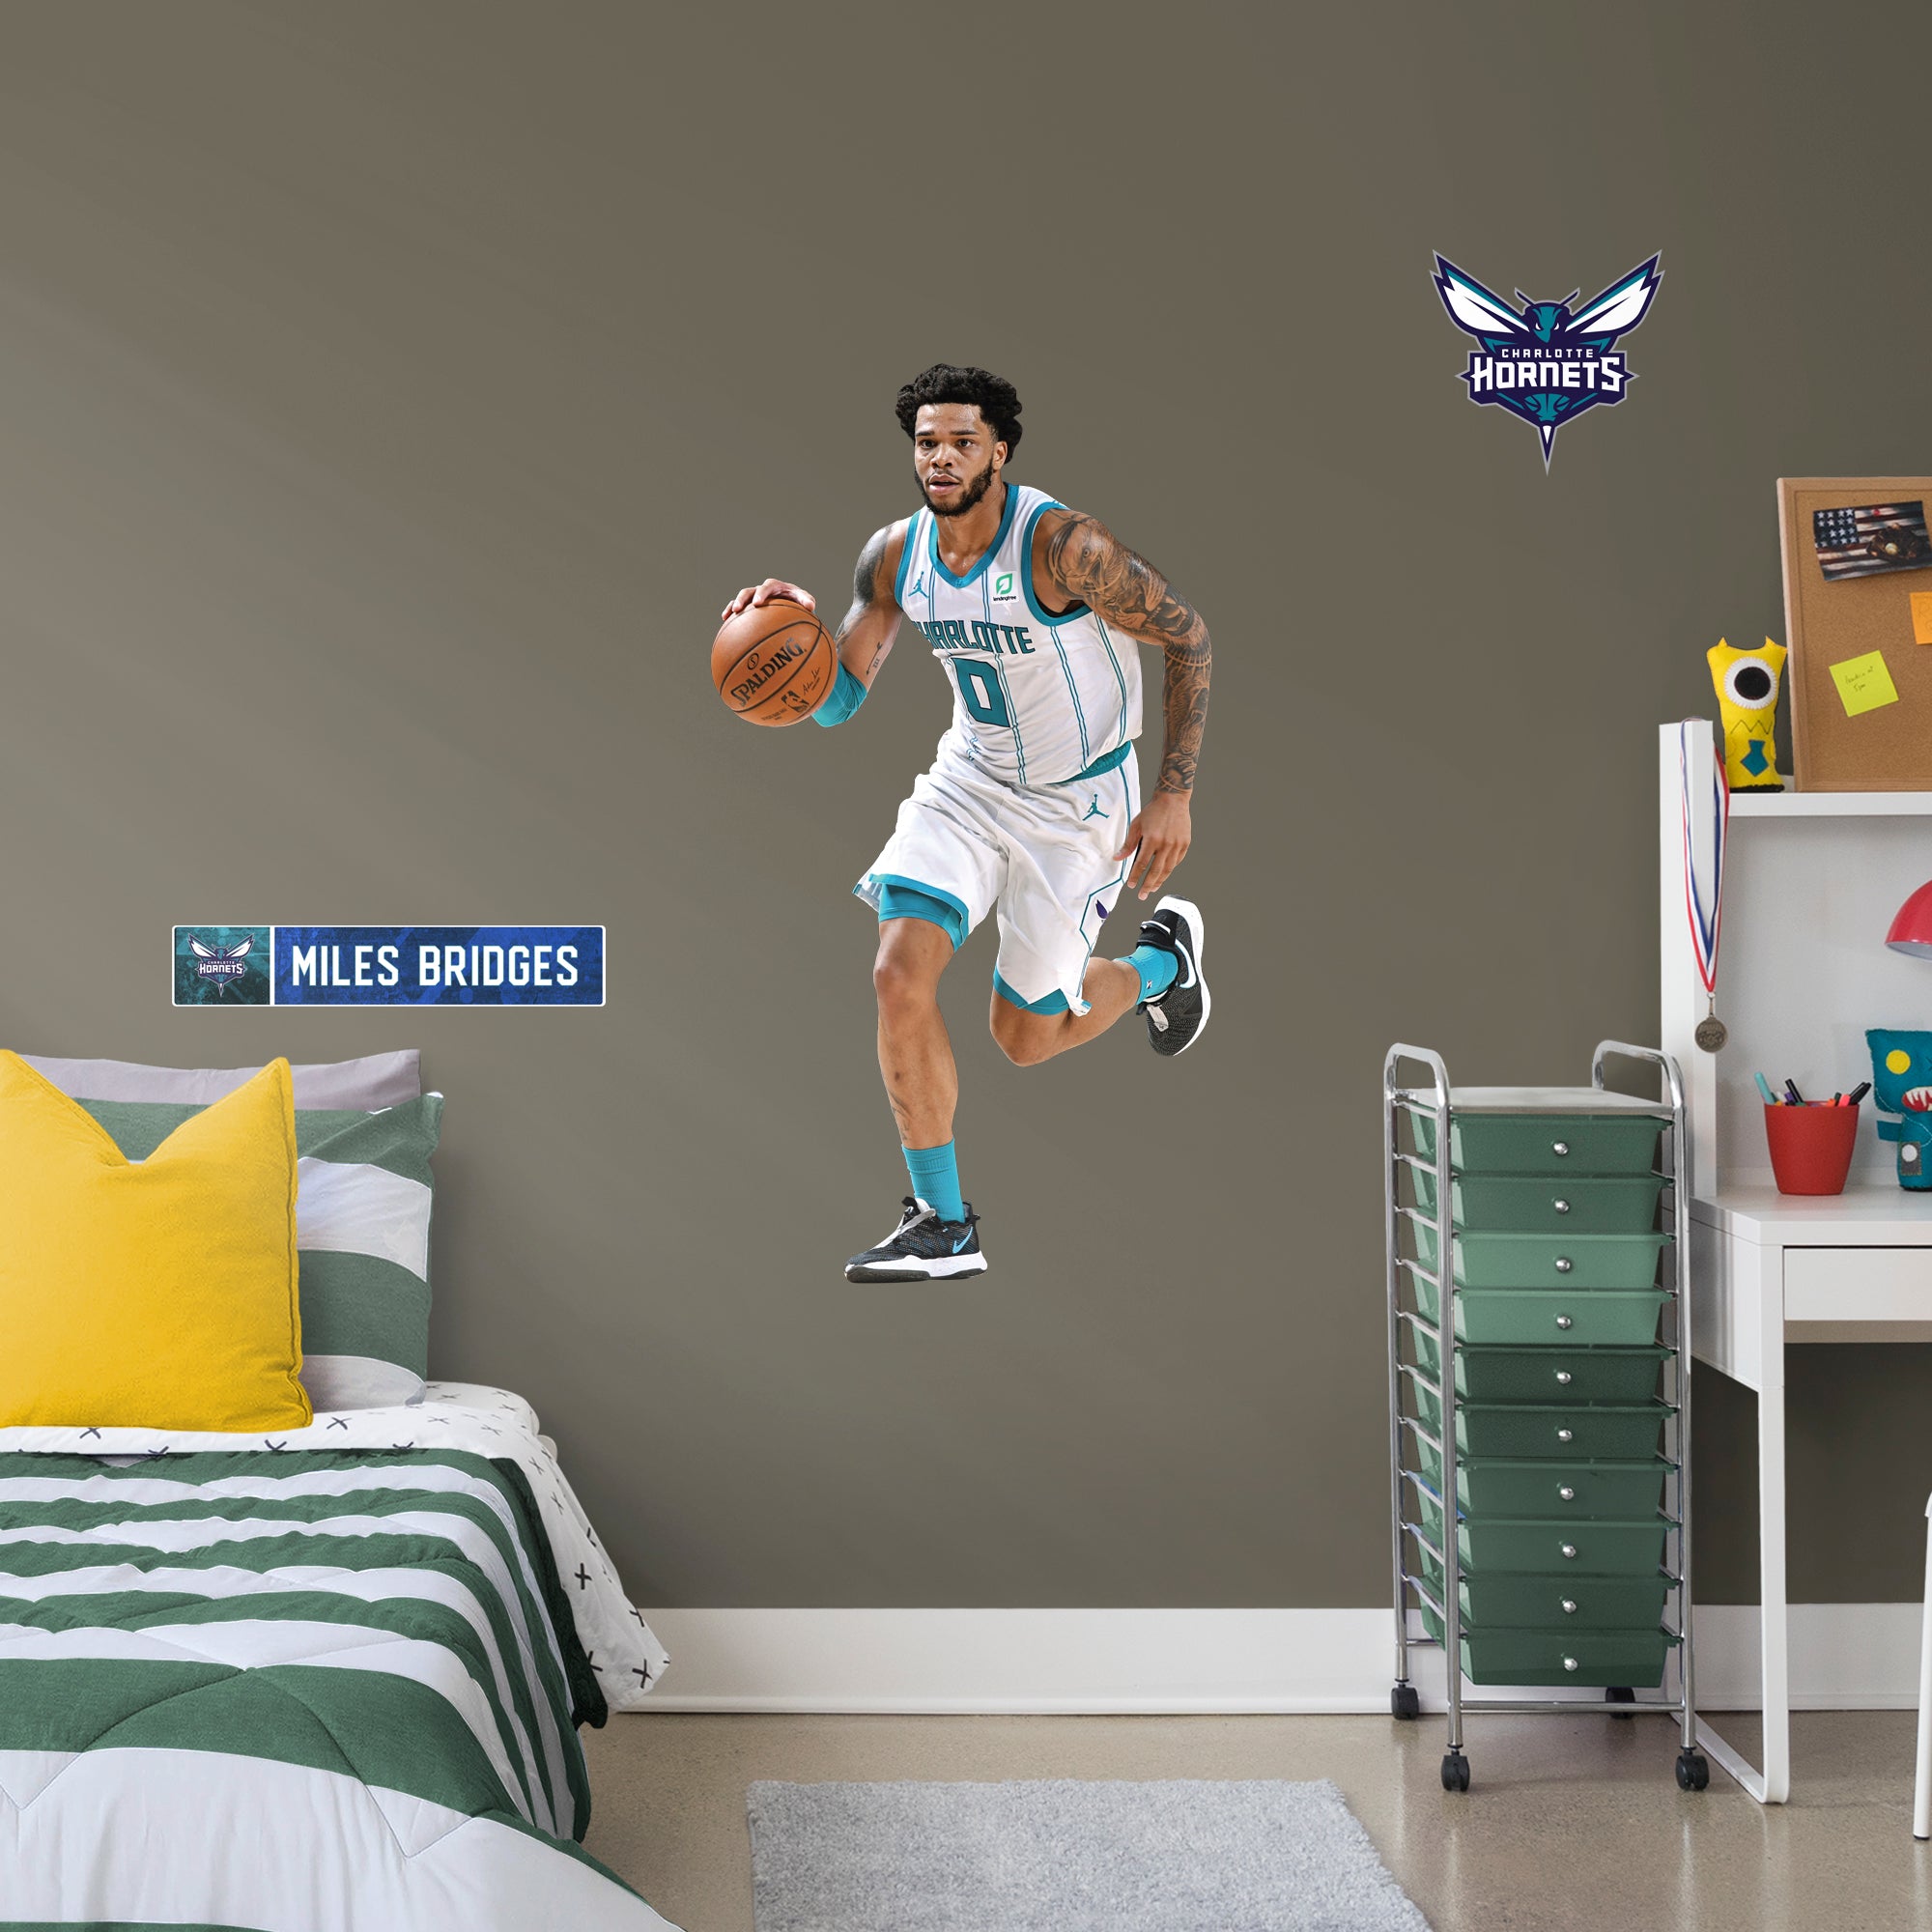 Miles Bridges 2021 for Charlotte Hornets - Officially Licensed NBA Removable Wall Decal Giant Athlete + 2 Decals (28"W x 51"H) b